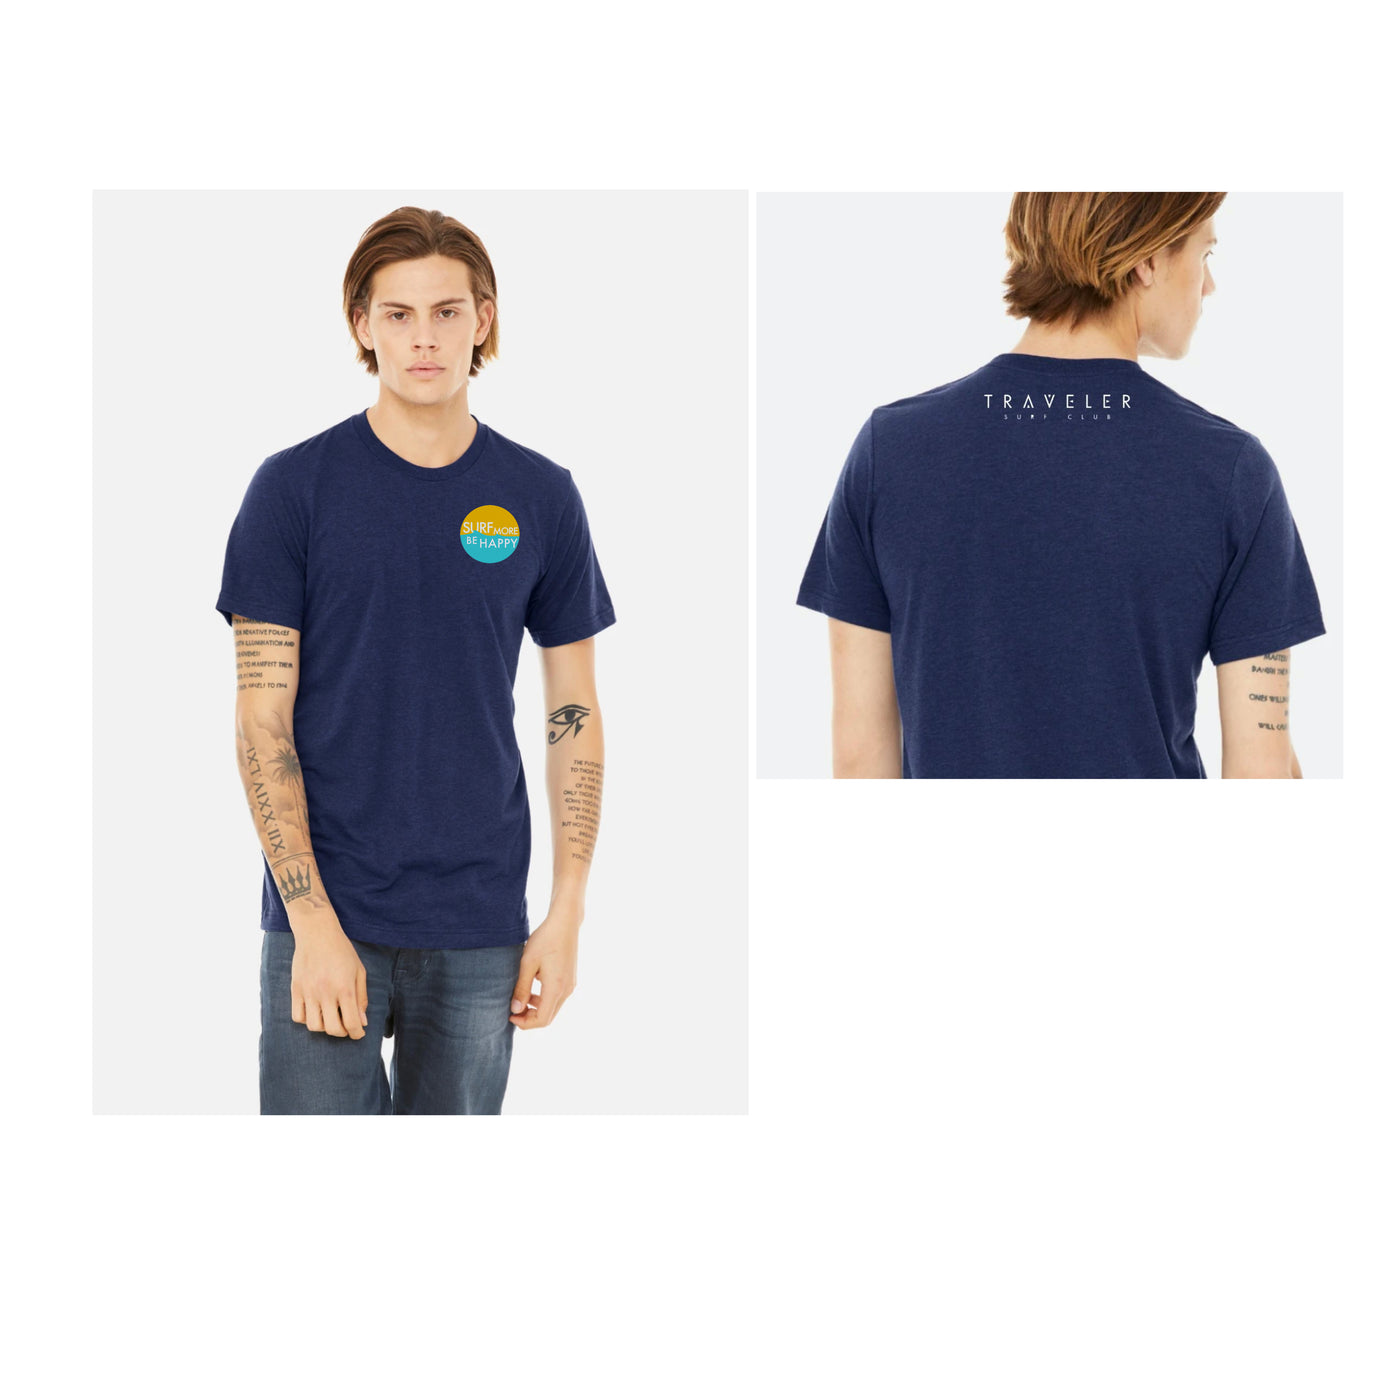 Surf More, Be Happy Tee